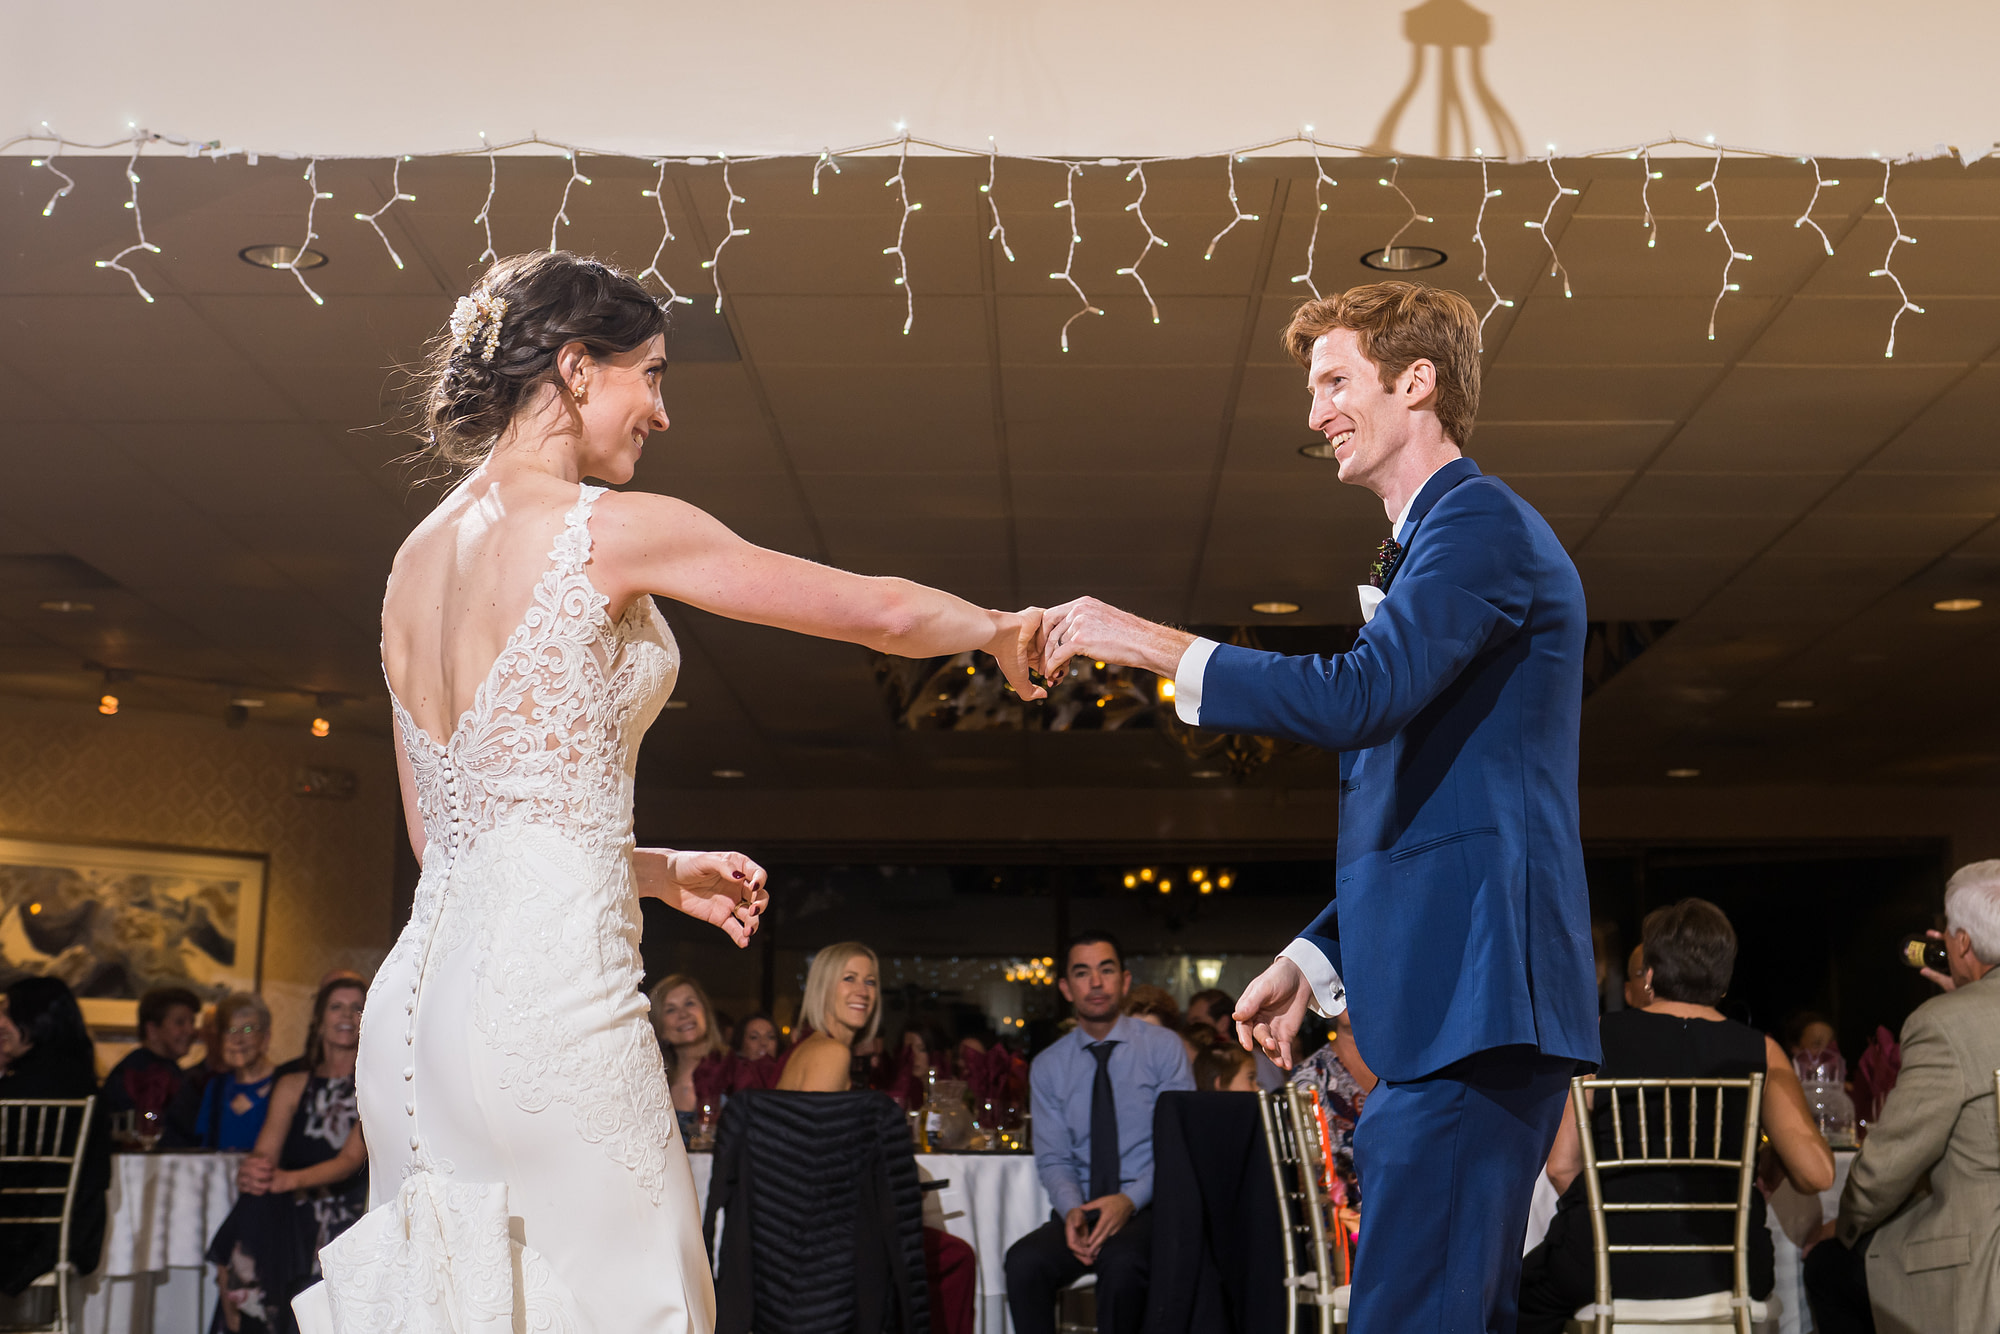 Bride and groom dance during a wedding reception at the Franciscan Event Center in Centennial, Colorado.